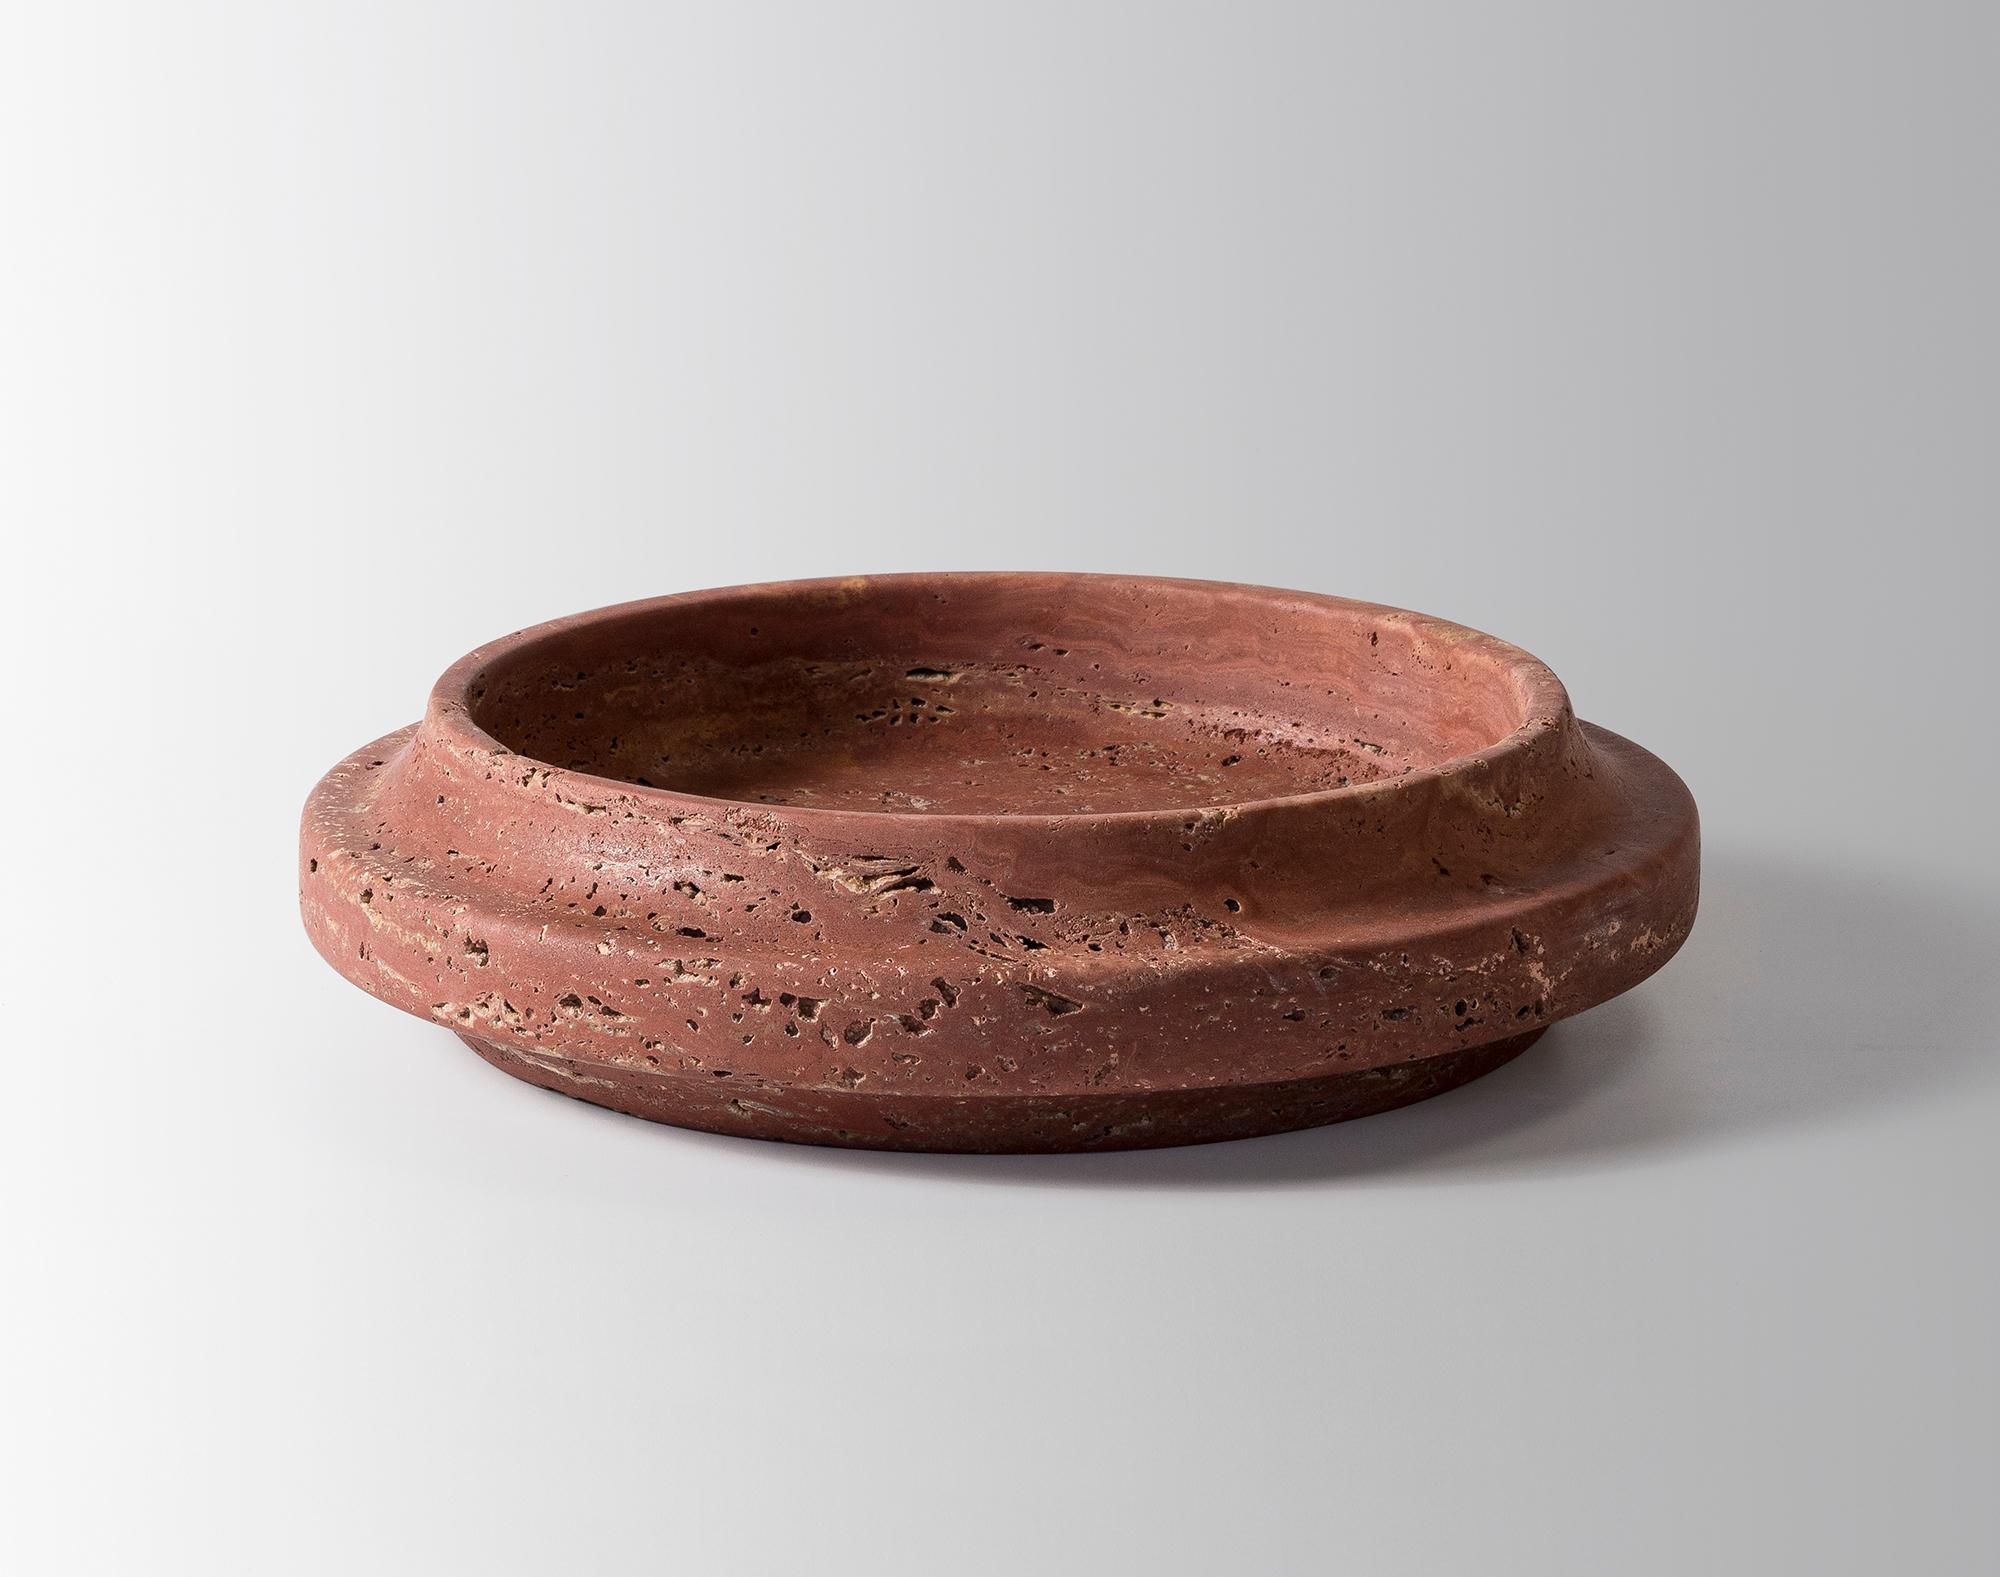 Red Travertine Bowl by Etamorph
Dimensions: Ø 27.5 x H 6.5 cm.
Materials: Red Travertine.

Available in different stone options. Please contact us. 

ETAMORPH is a NYC-based design boutique studio specializing in contemporary objects, custom